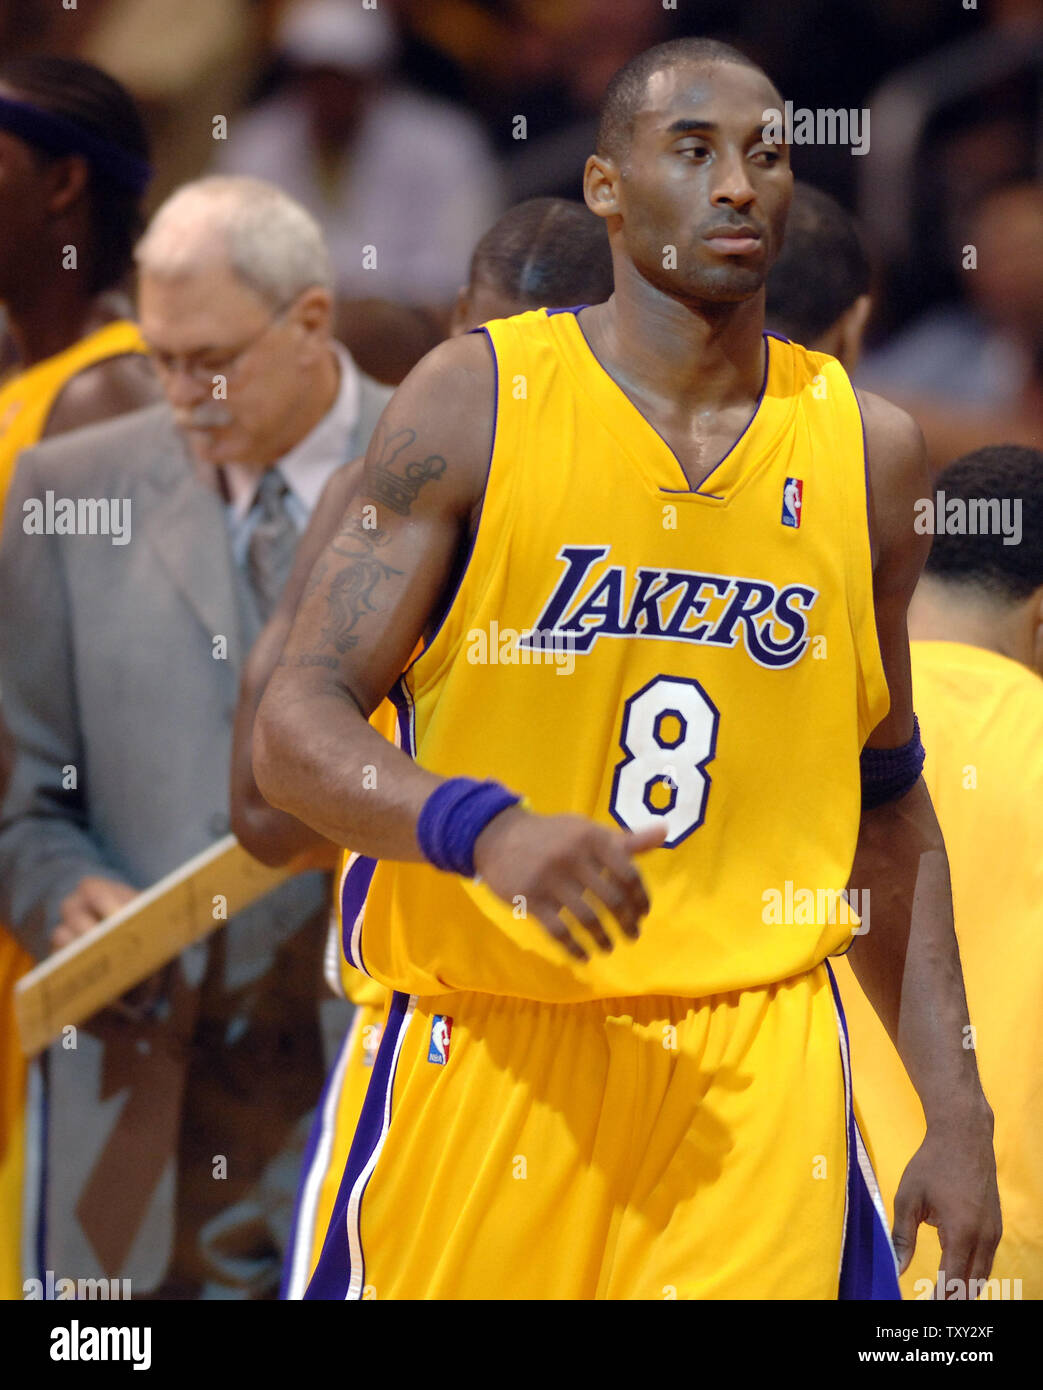 Los Angeles' guard Kobe Bryant returns to the floor after a time out in the NBA game between the Lakers and the Phoenix Suns at Staples Center in Los Angeles November 3, 2005.  (UPI Photo/Jim Ruymen) Stock Photo